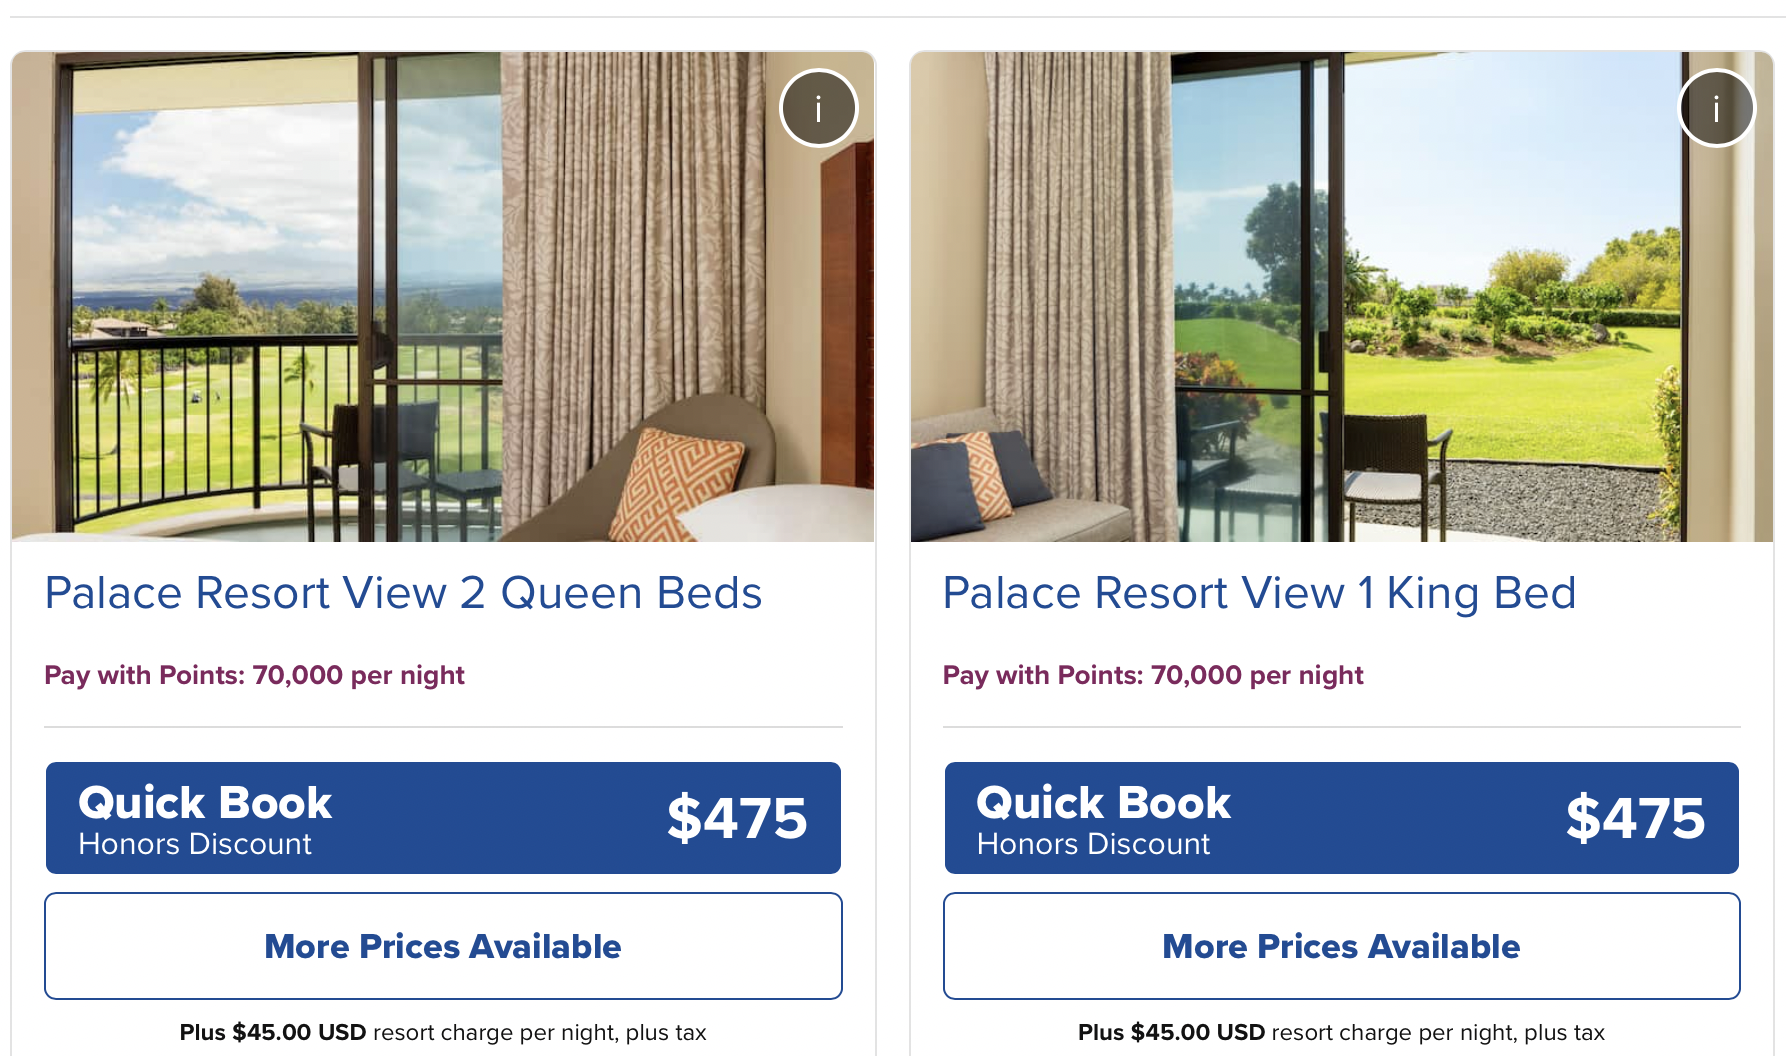 Hotel room prices with points